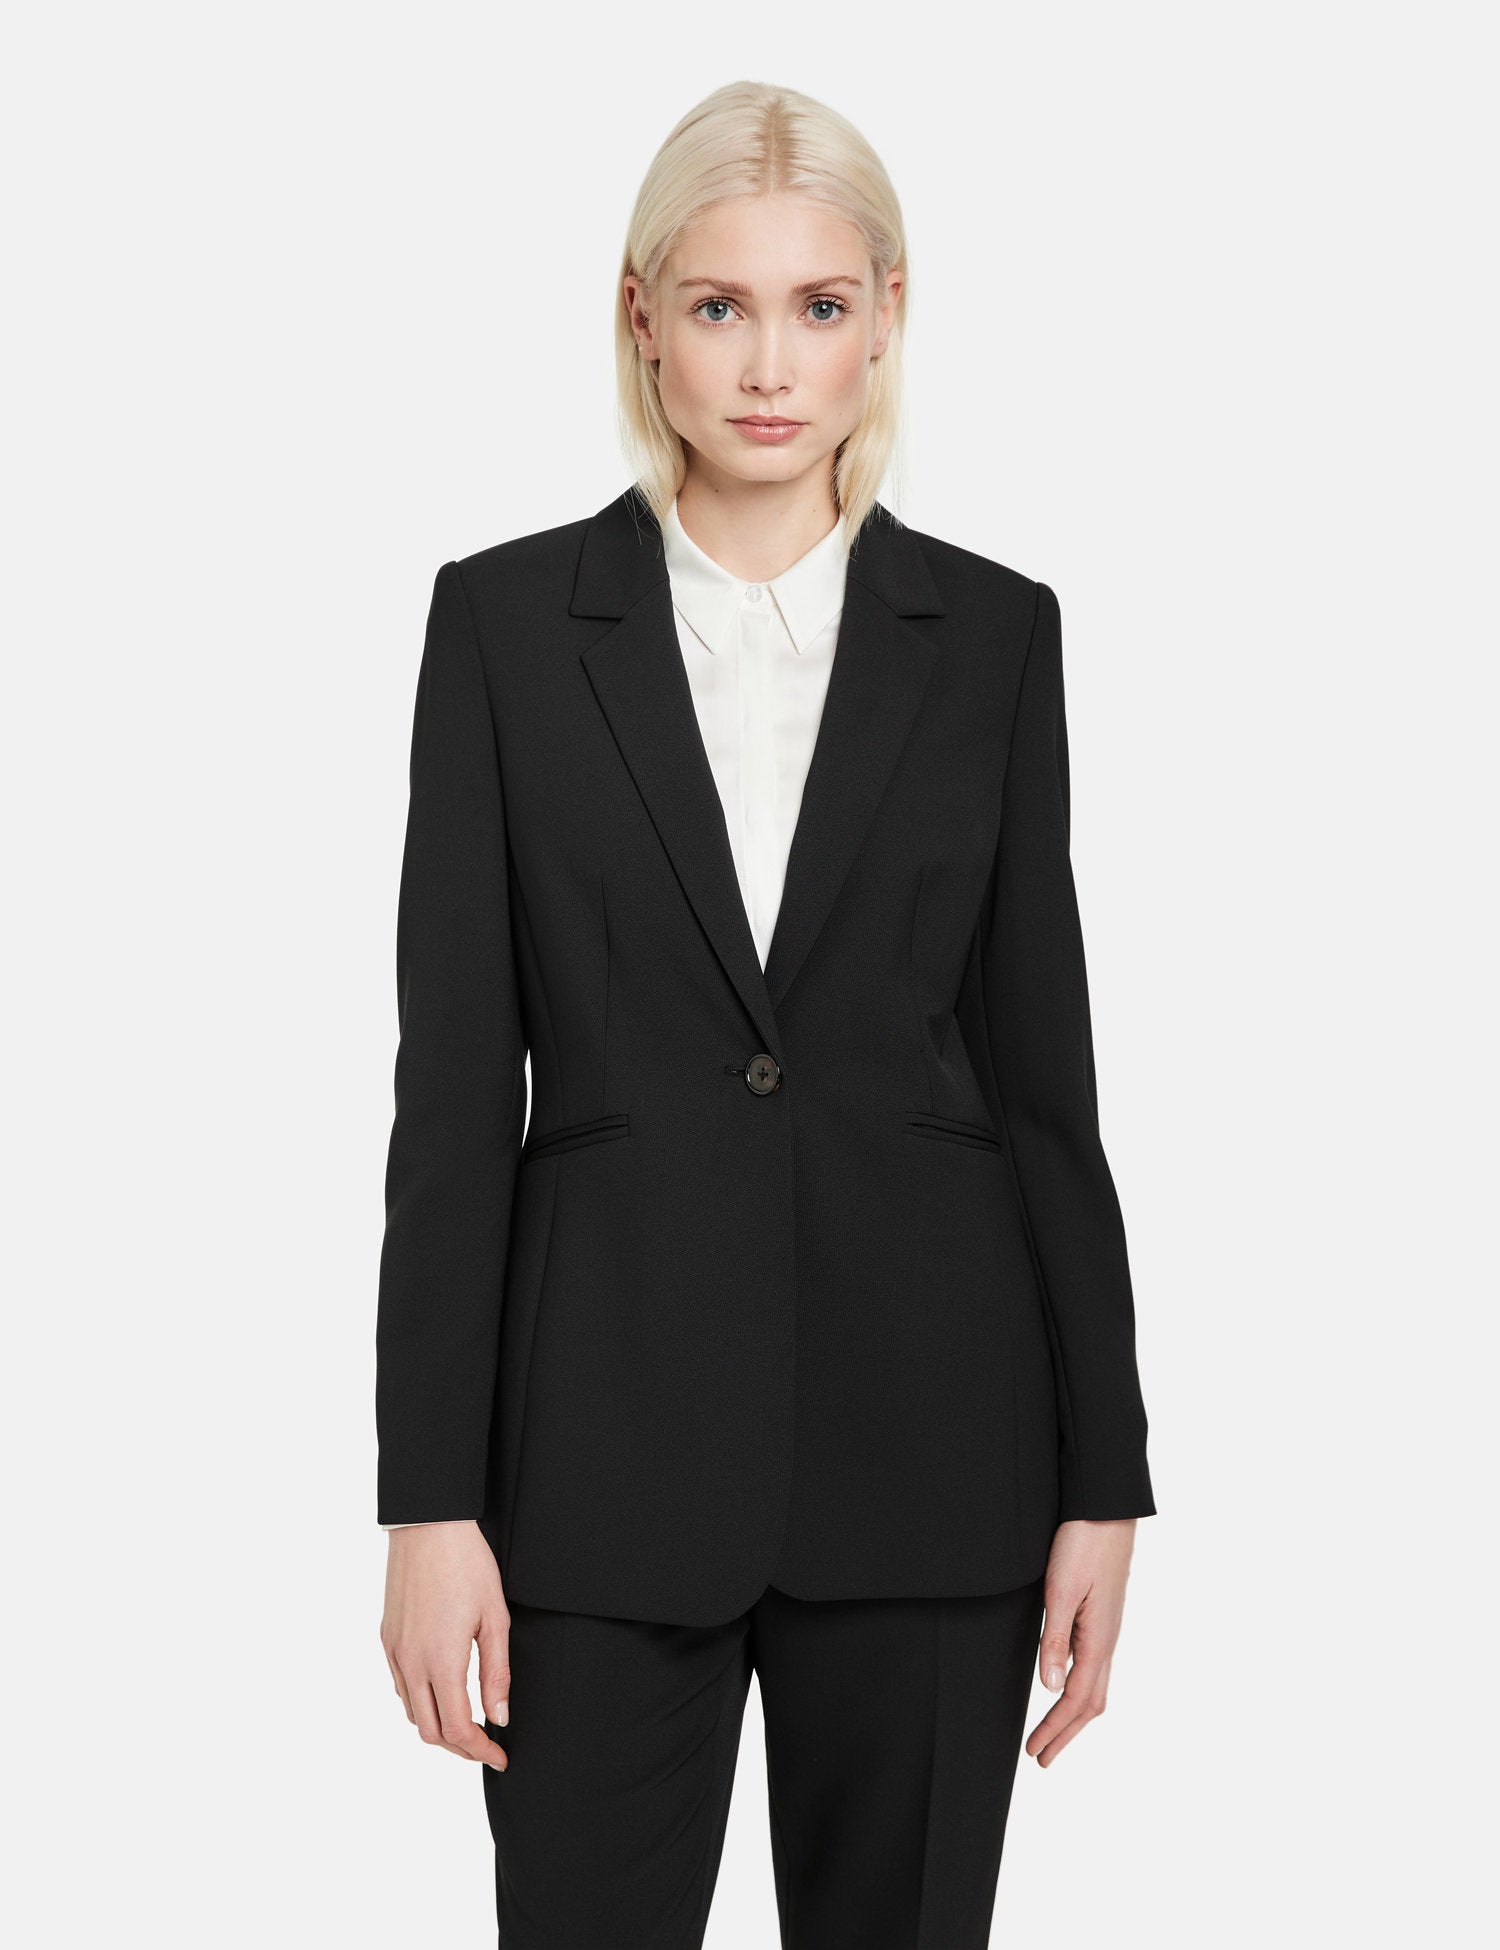 Fitted Blazer Made Of Fine Stretch Fabric_930994-19899_1100_01